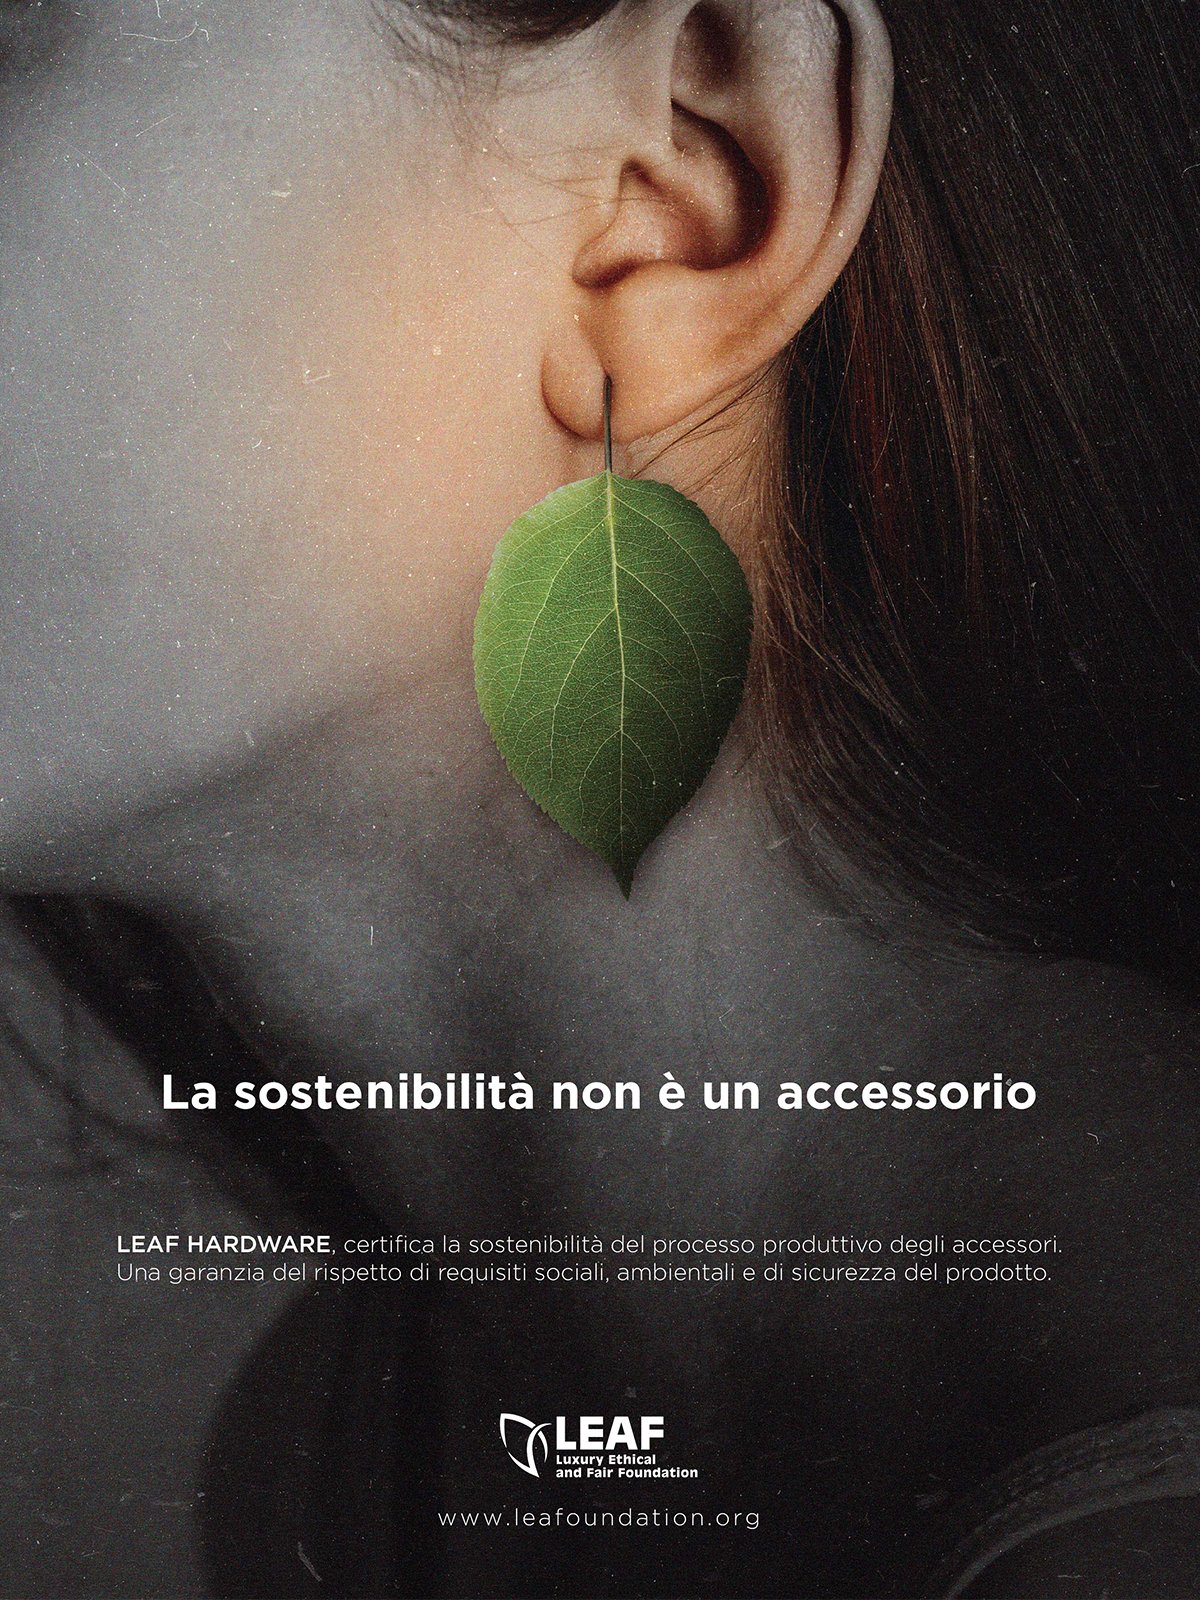 Metal accessories for fashion: sustainability certification is born in Florence